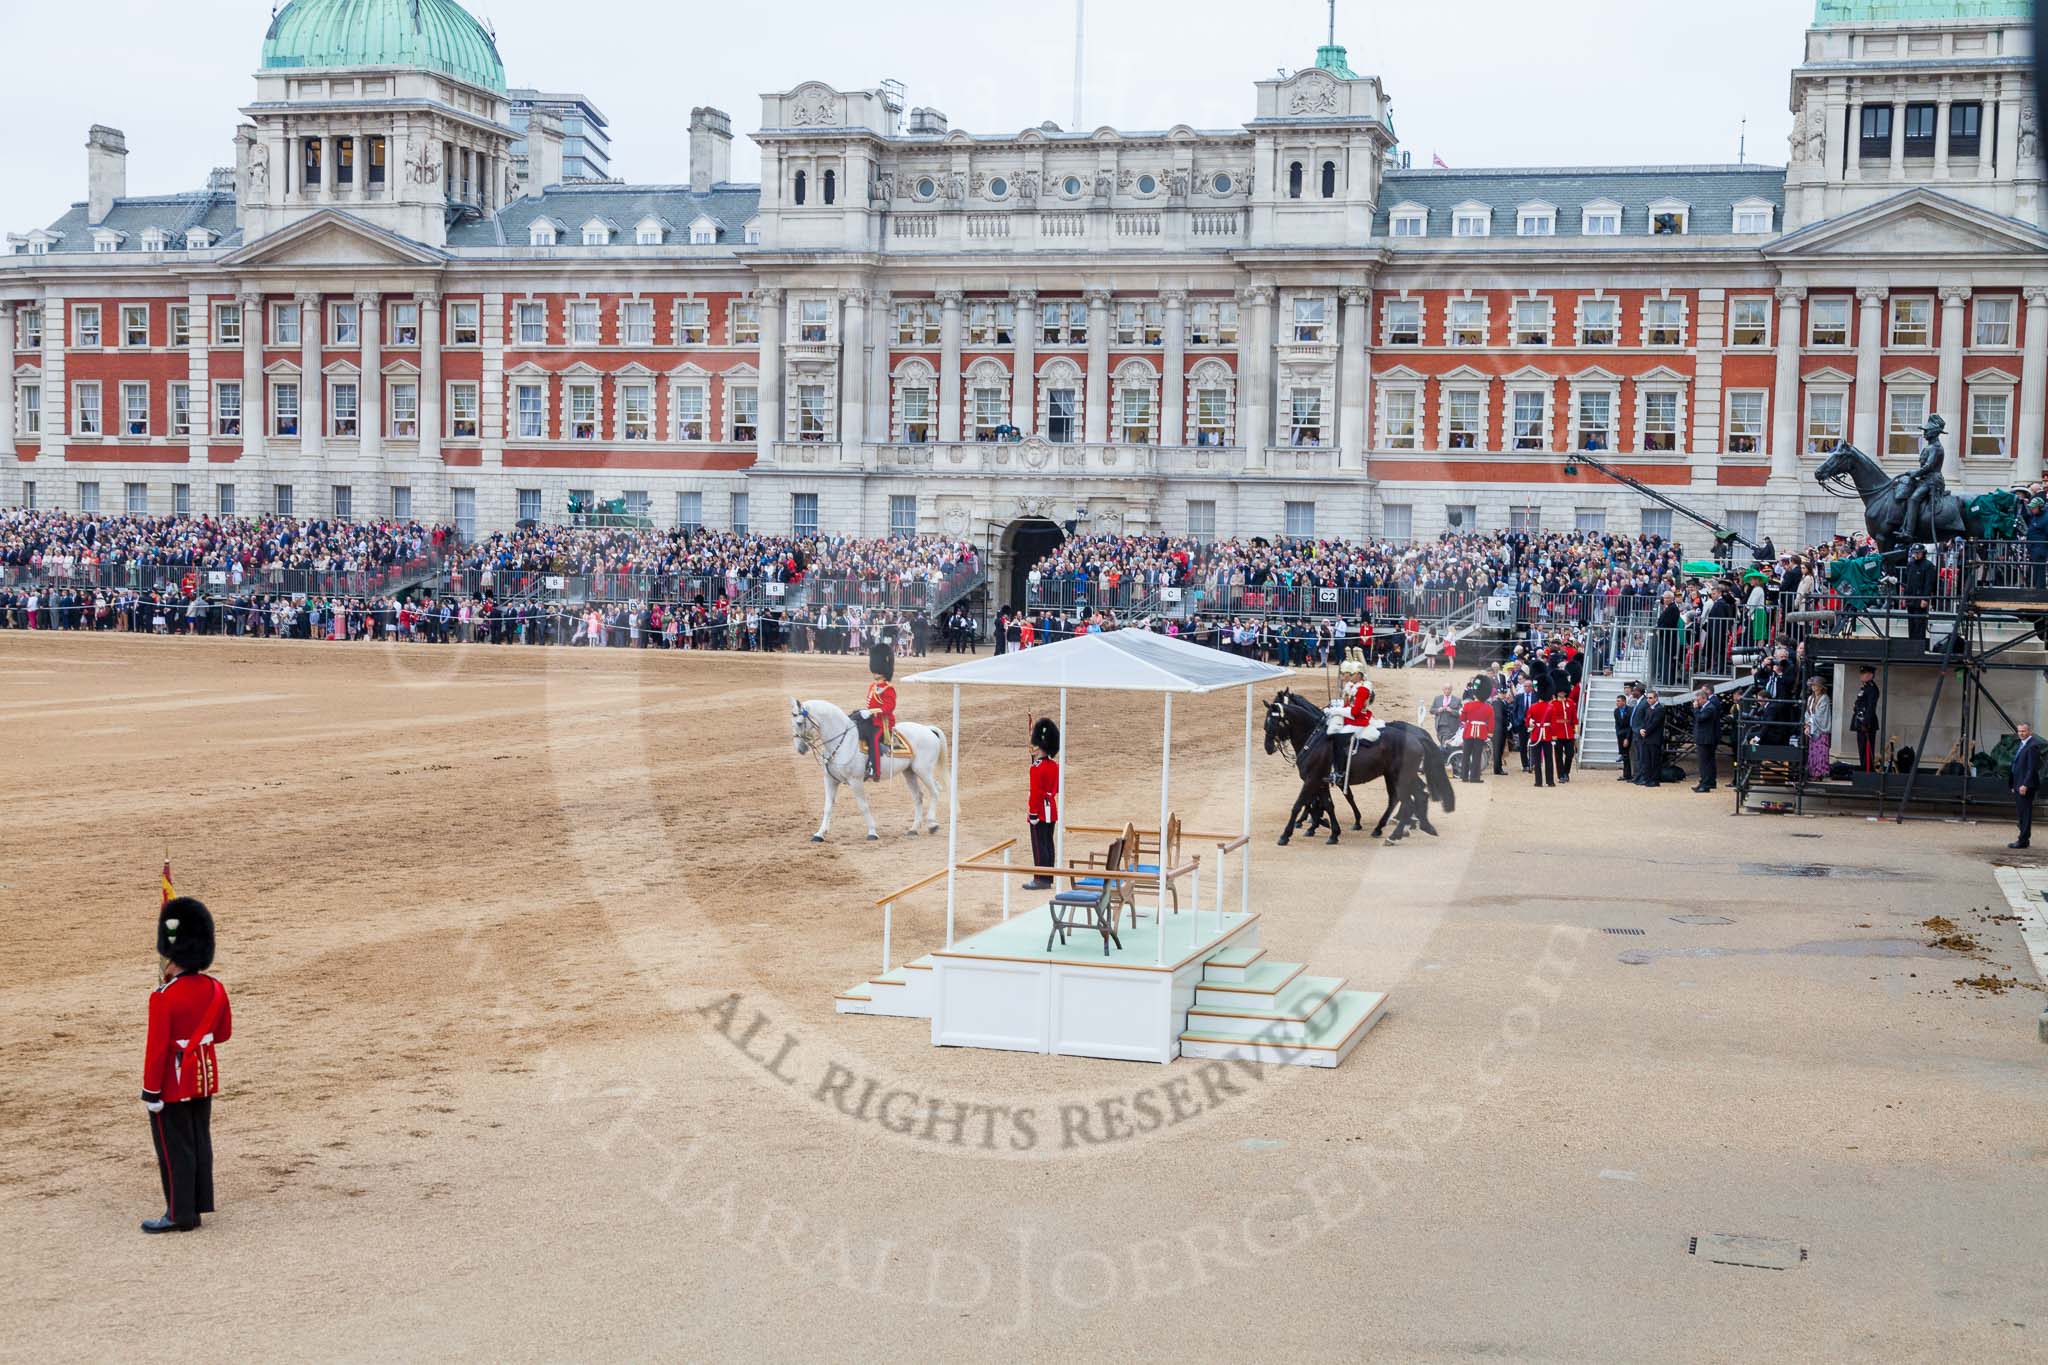 Trooping the Colour 2015. Image #683, 13 June 2015 12:12 Horse Guards Parade, London, UK